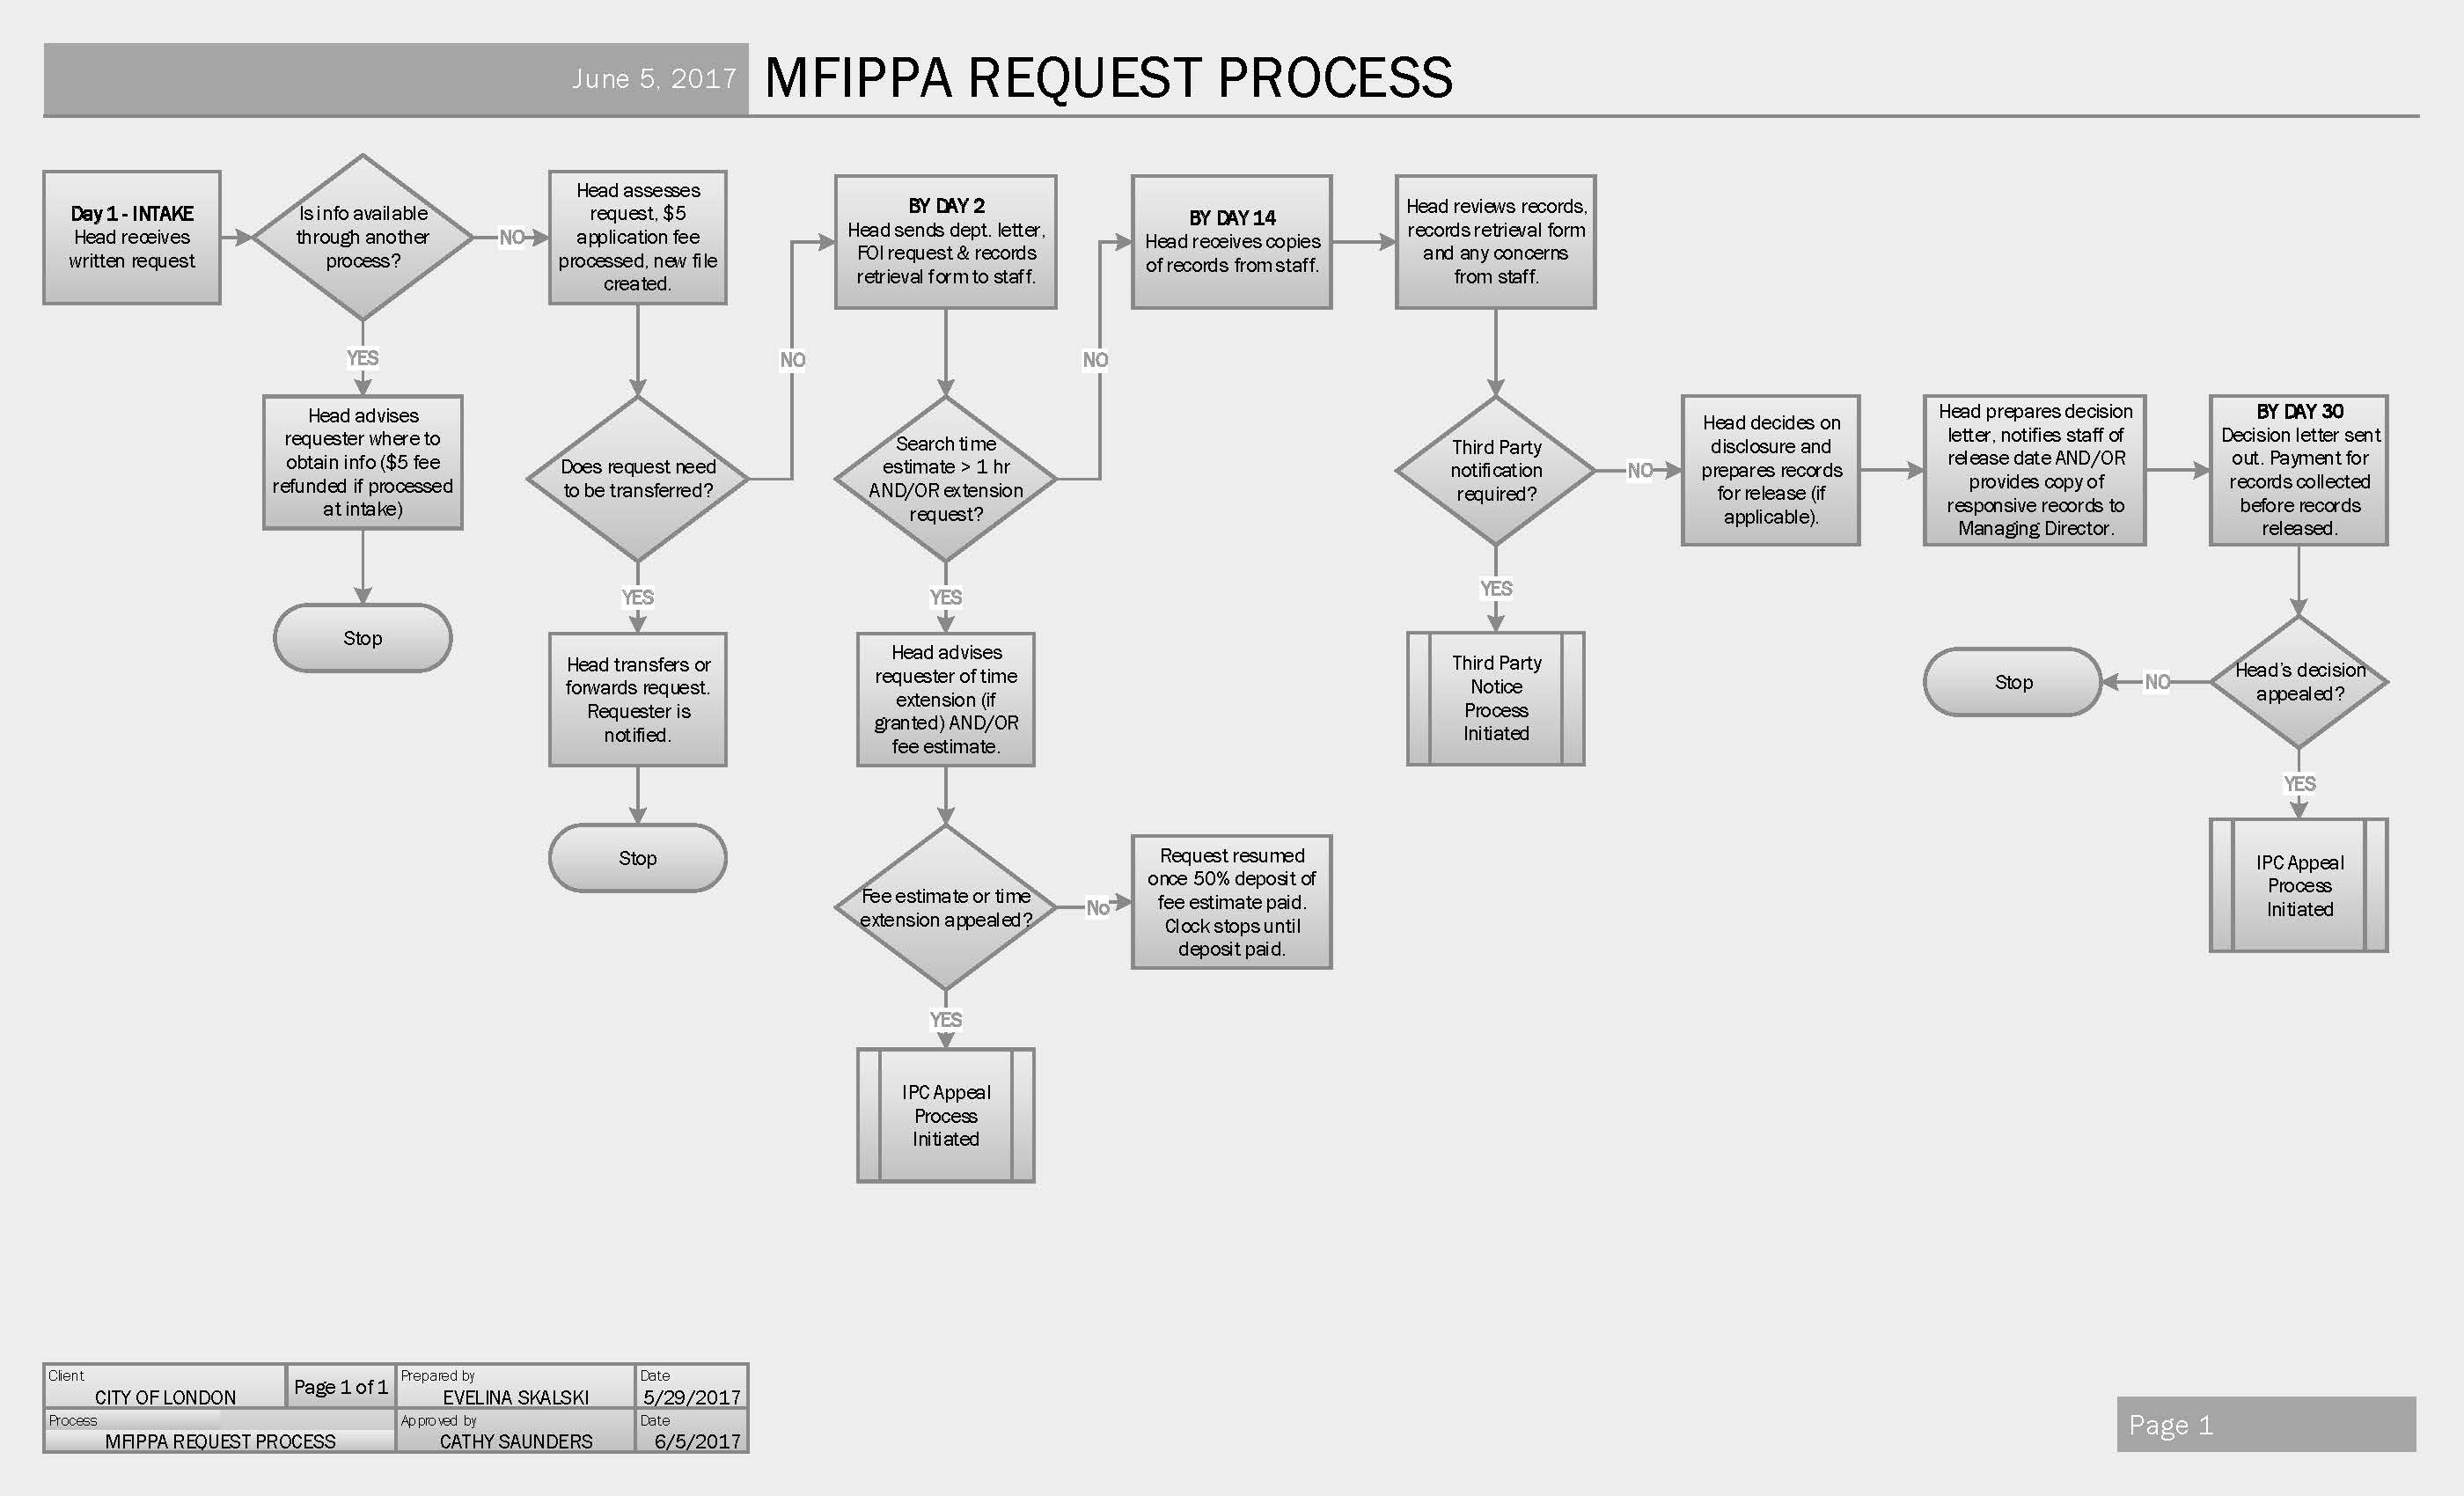 Picture shows the 30 days MFIPPA process from beginning to end with the possibilities of request appeal.